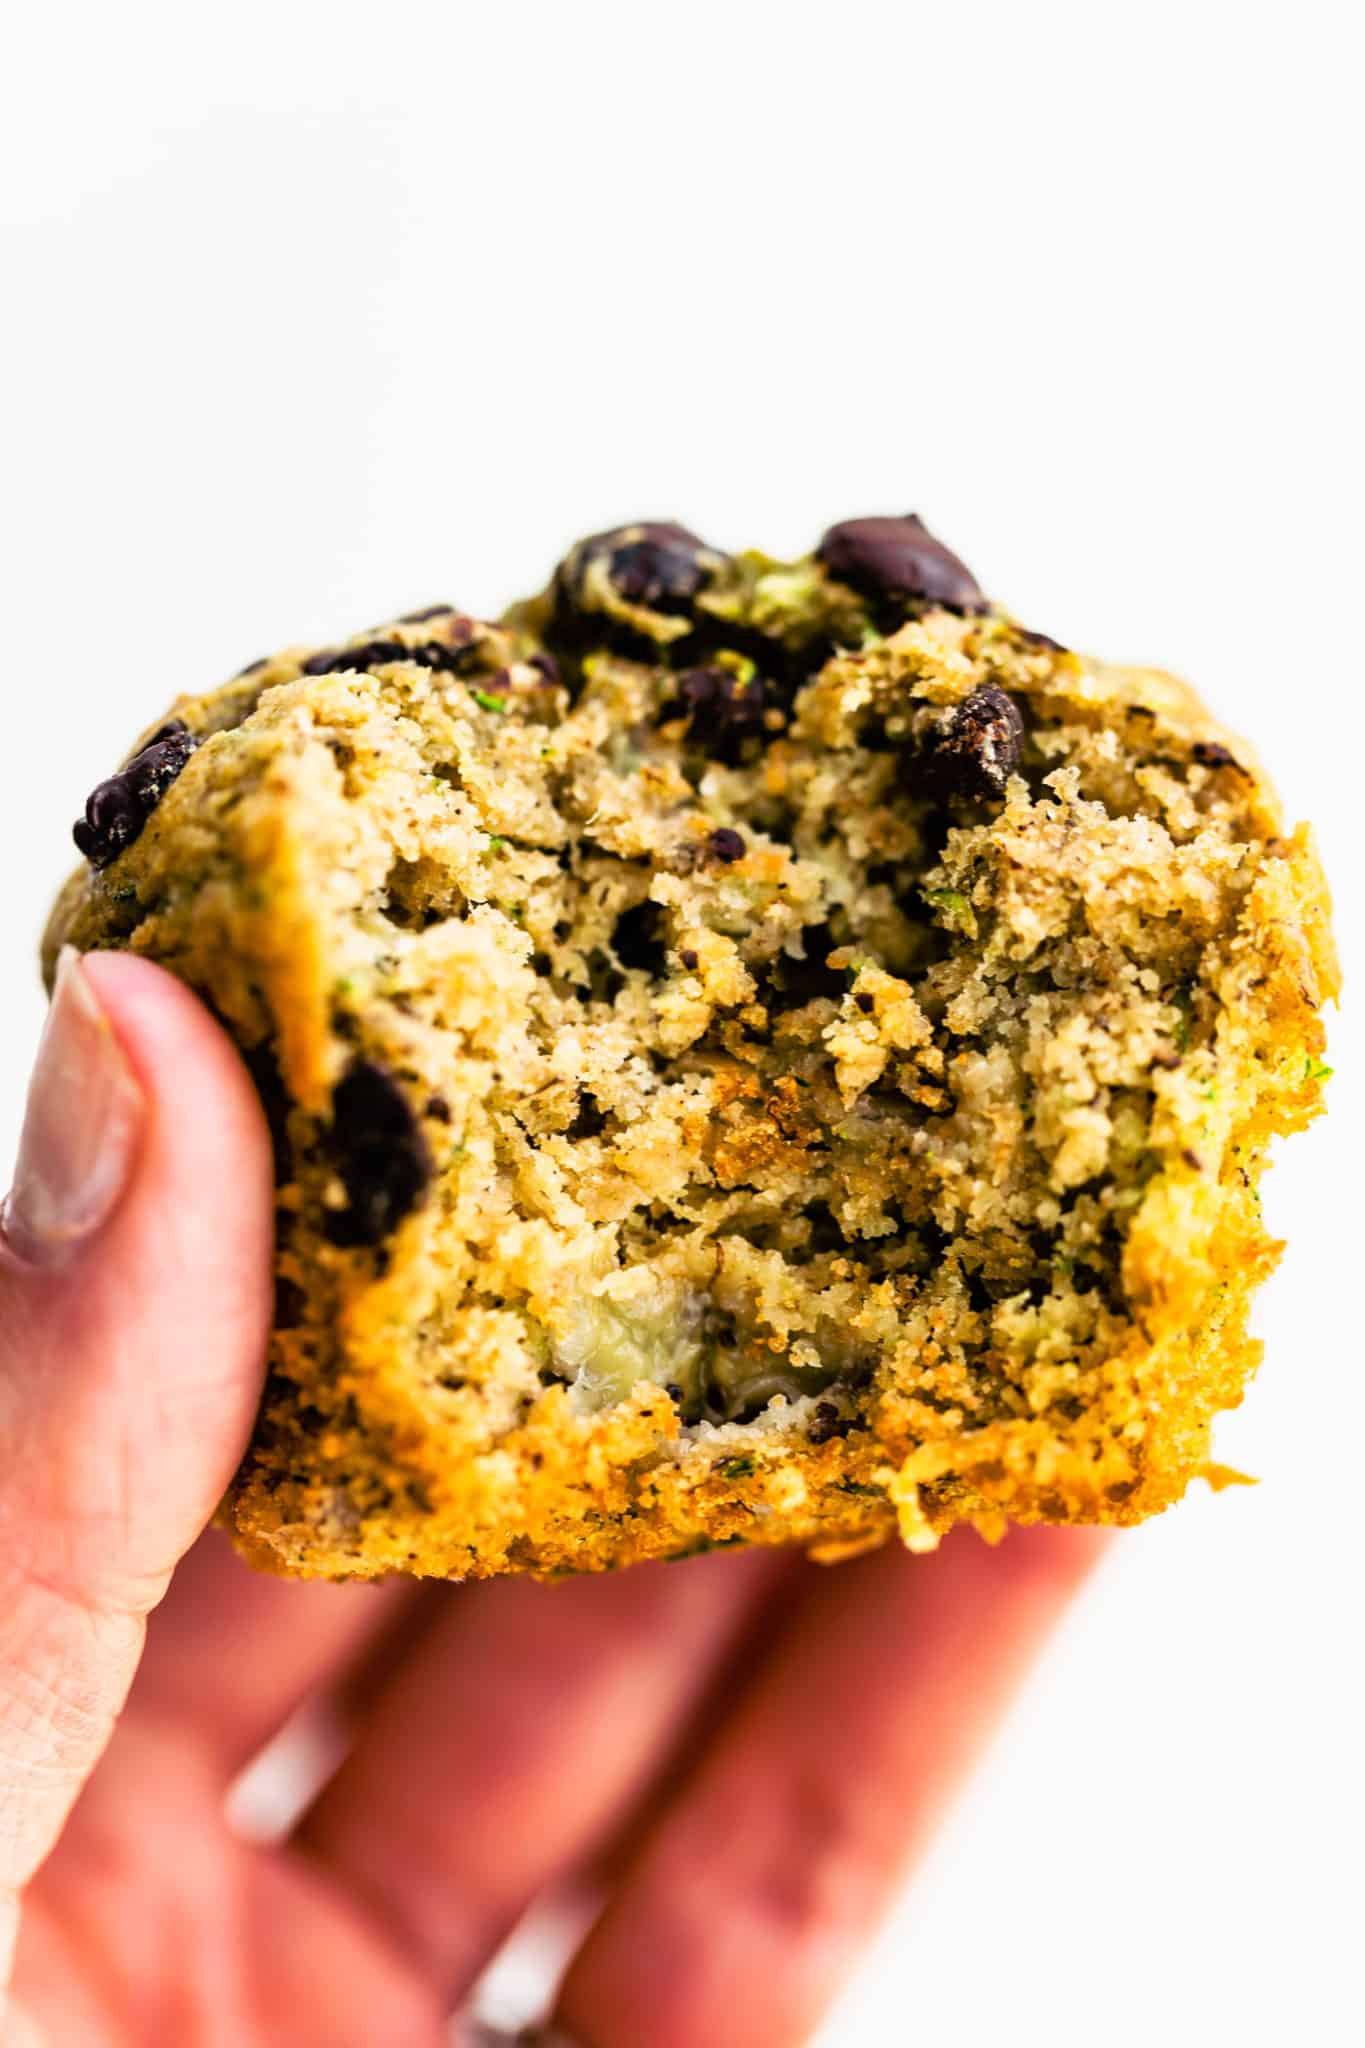 a woman's hand holding a chocolate chip gluten free zucchini muffin with a bite taken out